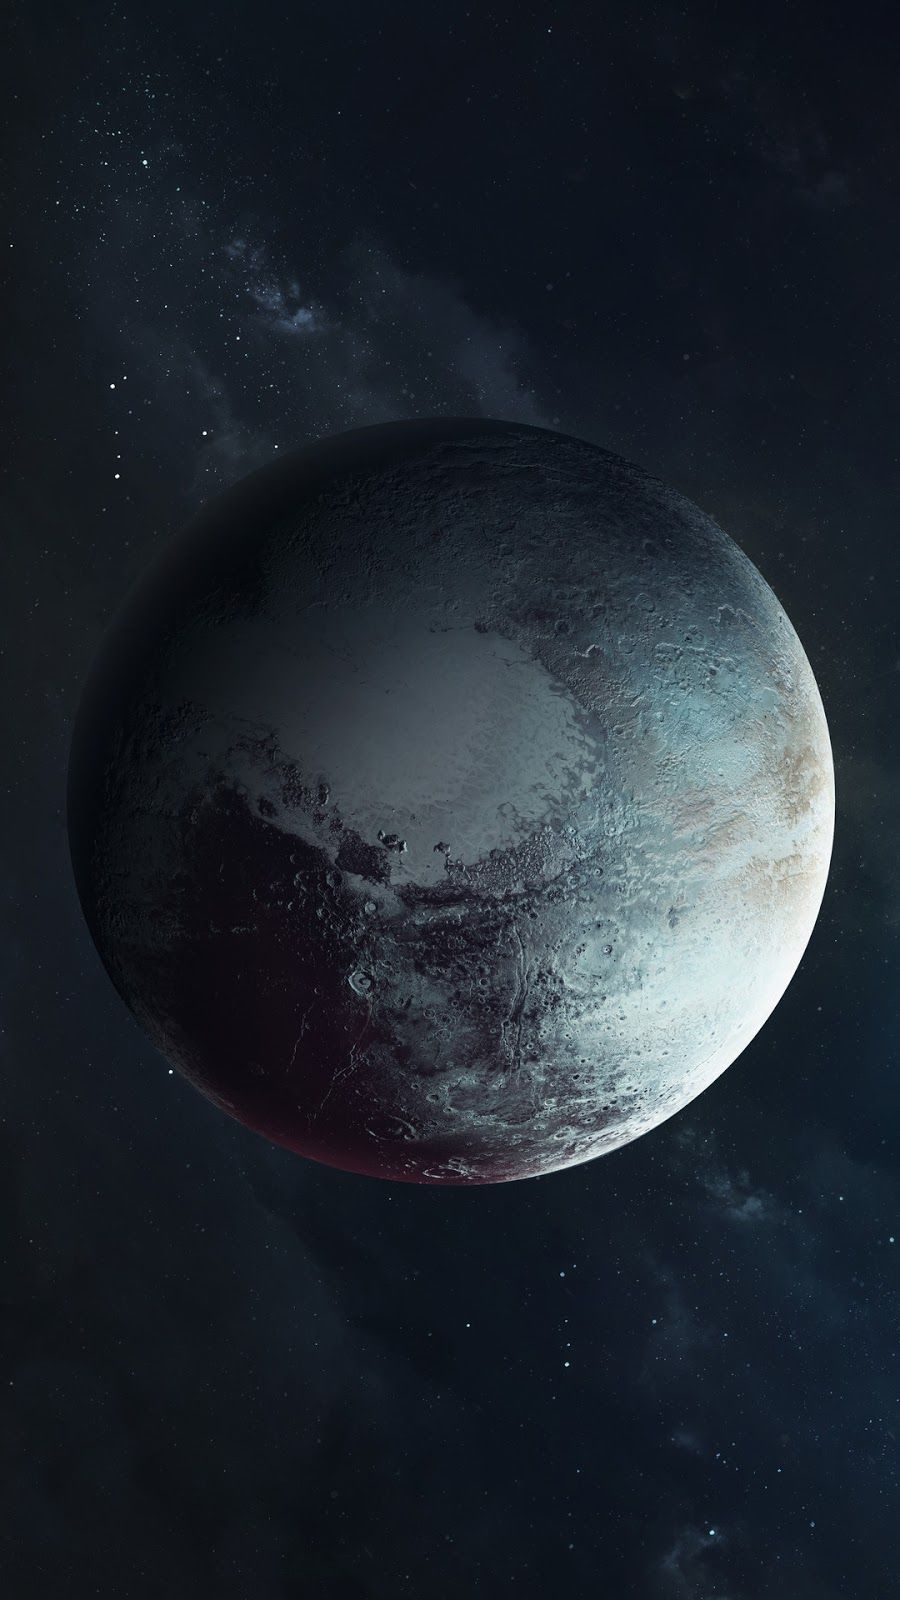 Solar system planets (9 wallpaper). Planets wallpaper, Planets, Astronomy